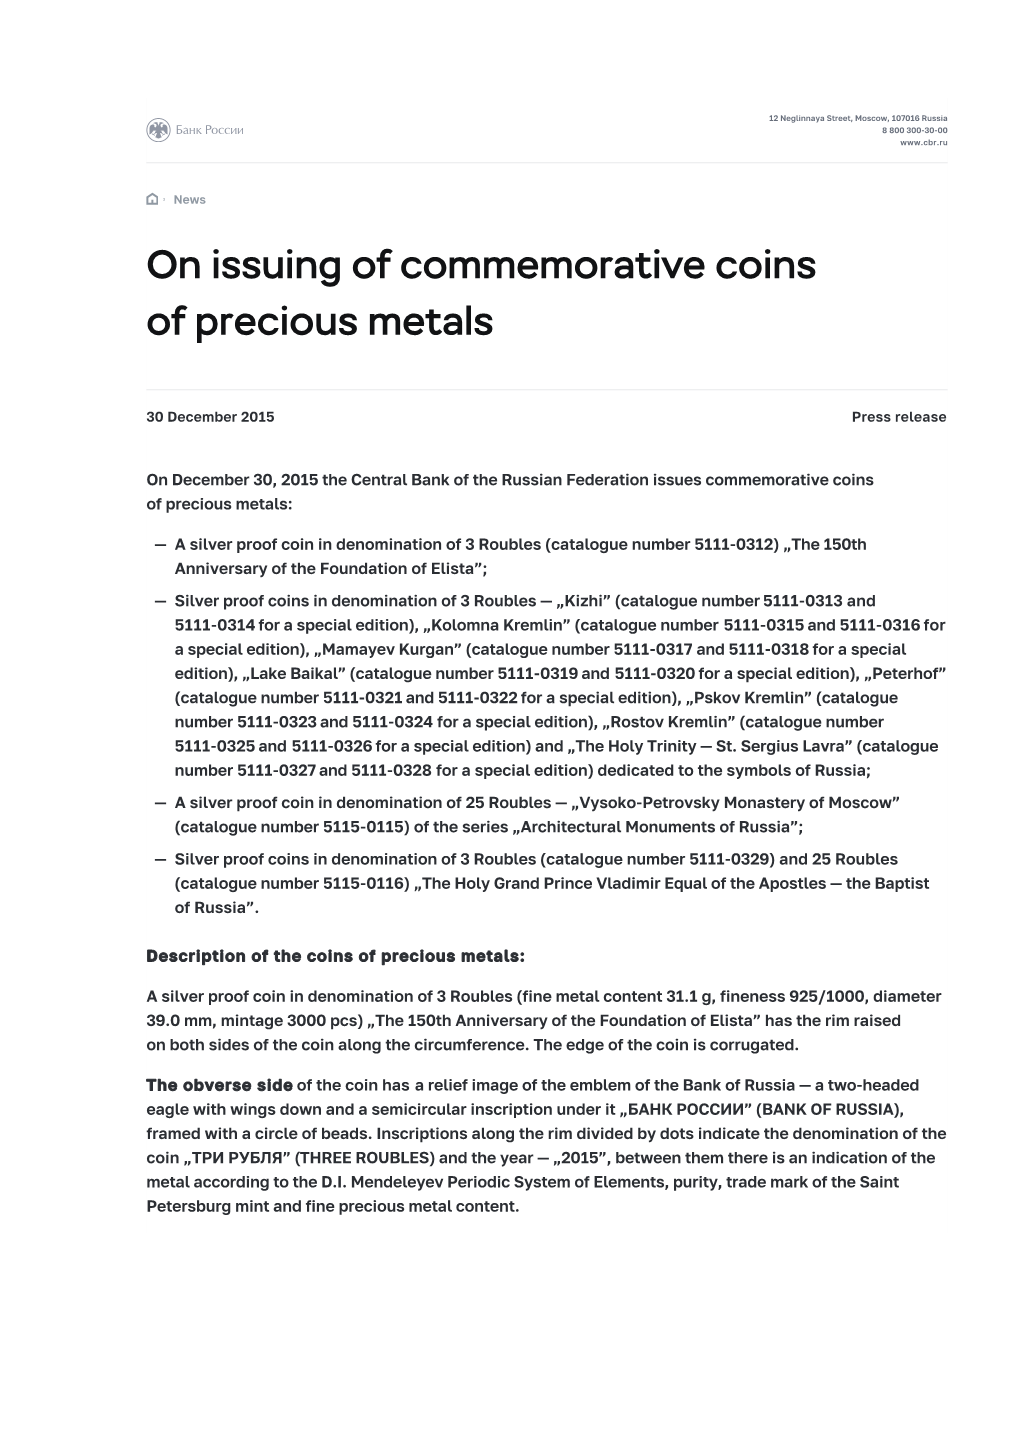 On Issuing of Commemorative Coins of Precious Metals